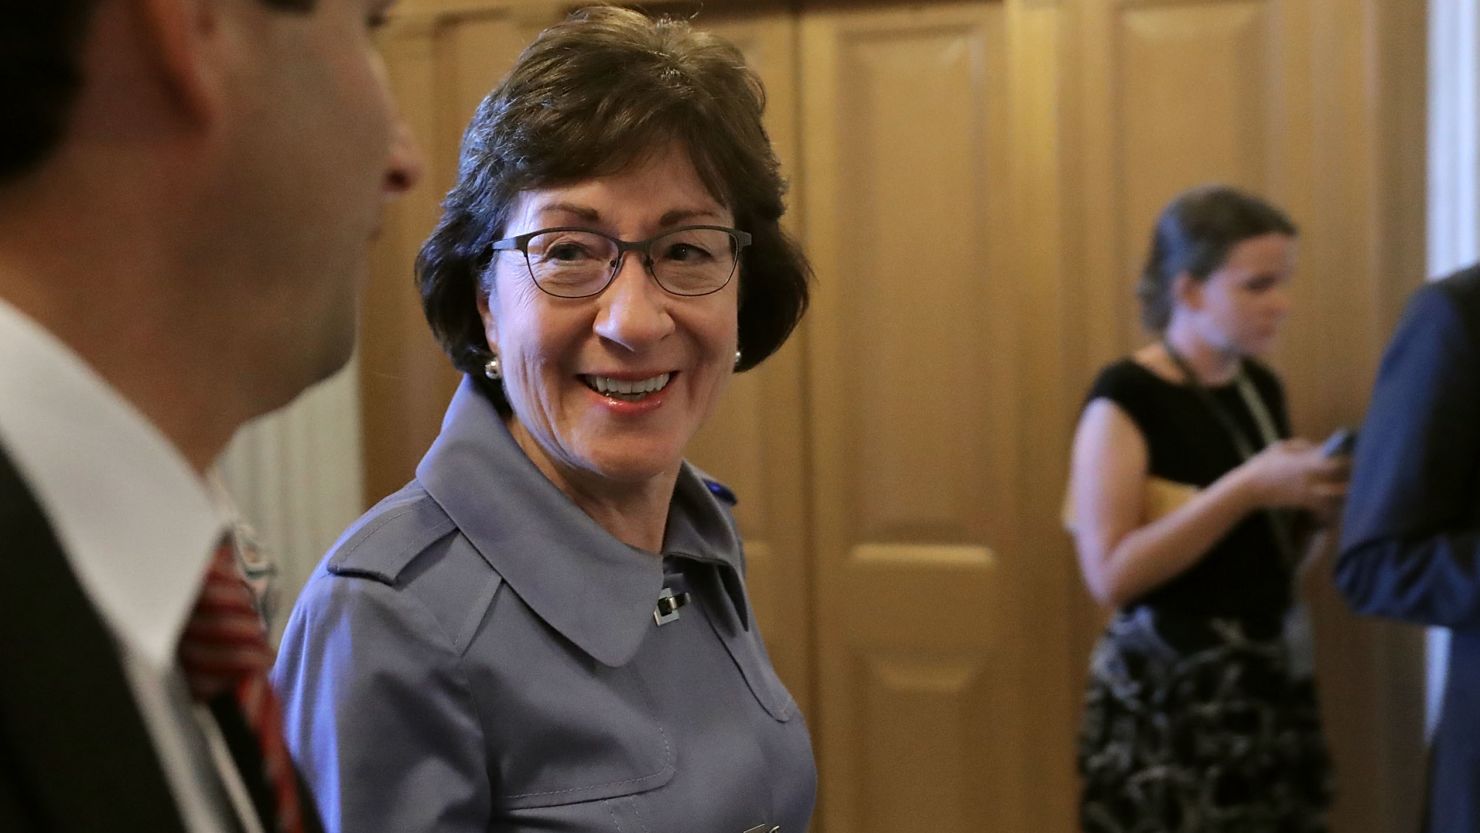 Sen. Susan Collins, R-Maine, heads for the Senate floor for a vote at the US Capitol on July 26, 2017, in Washington.